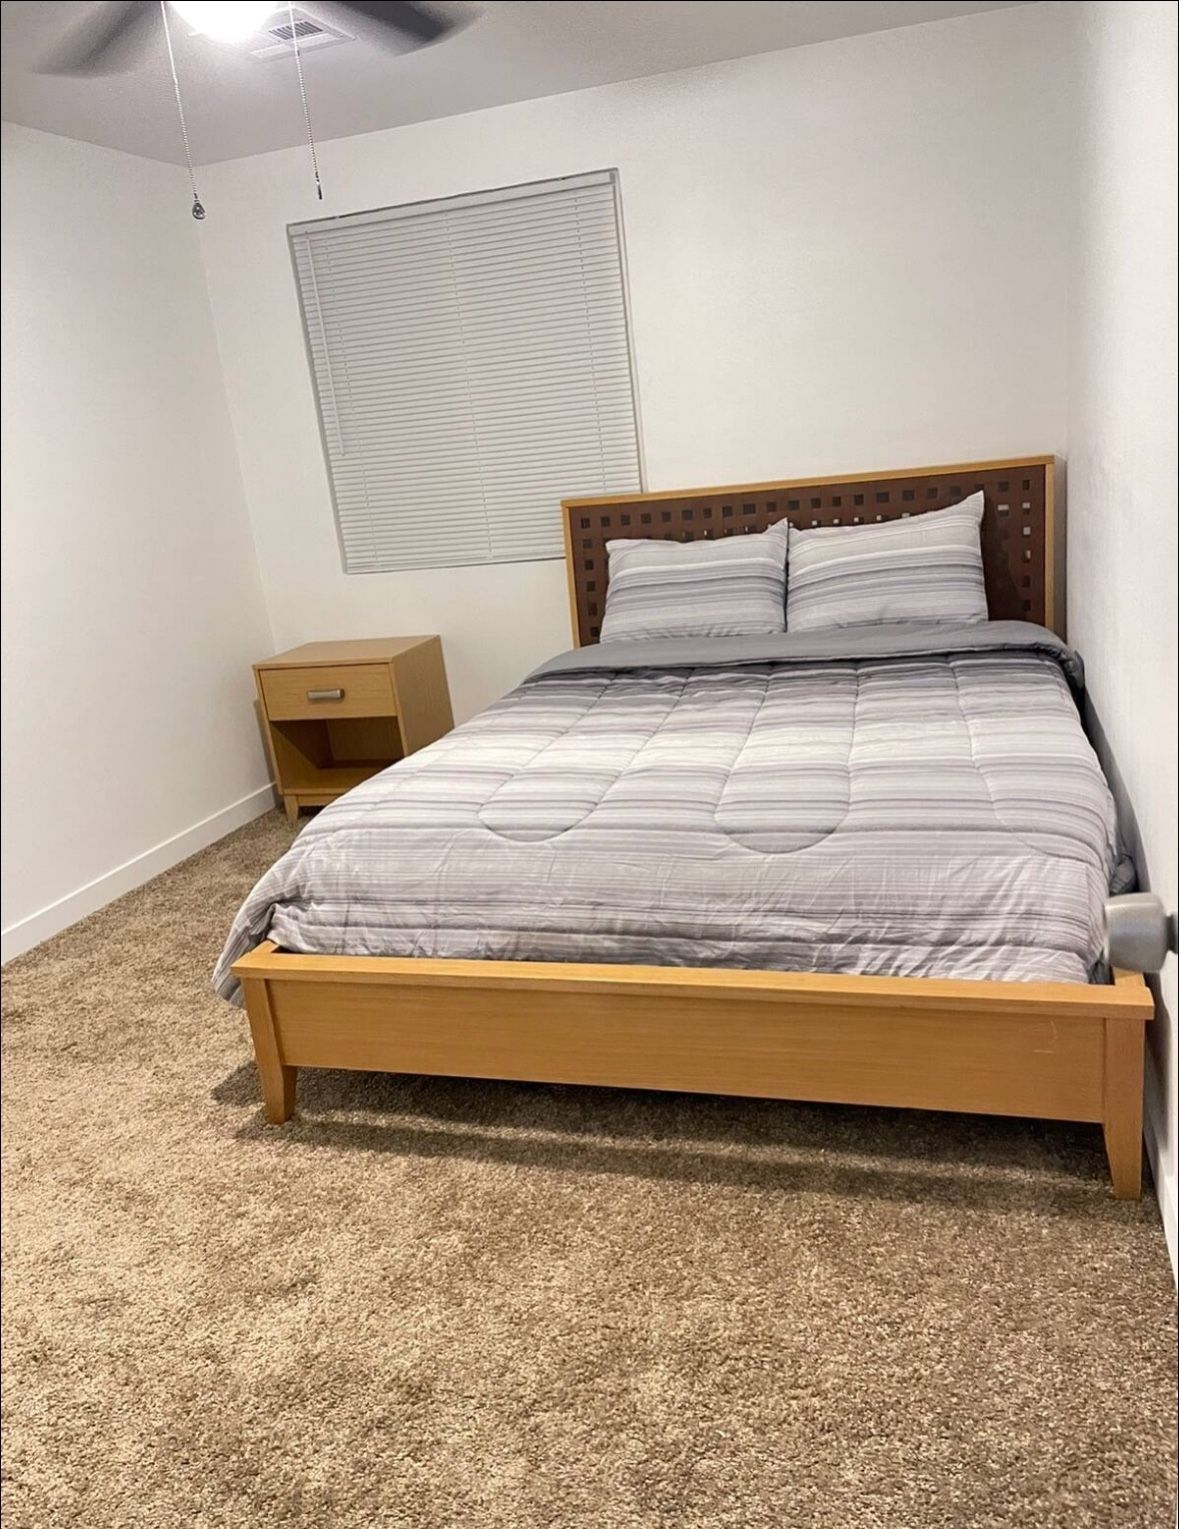 QUEEN SIZE BED FRAME MATRESS AND BOX  SPRING 